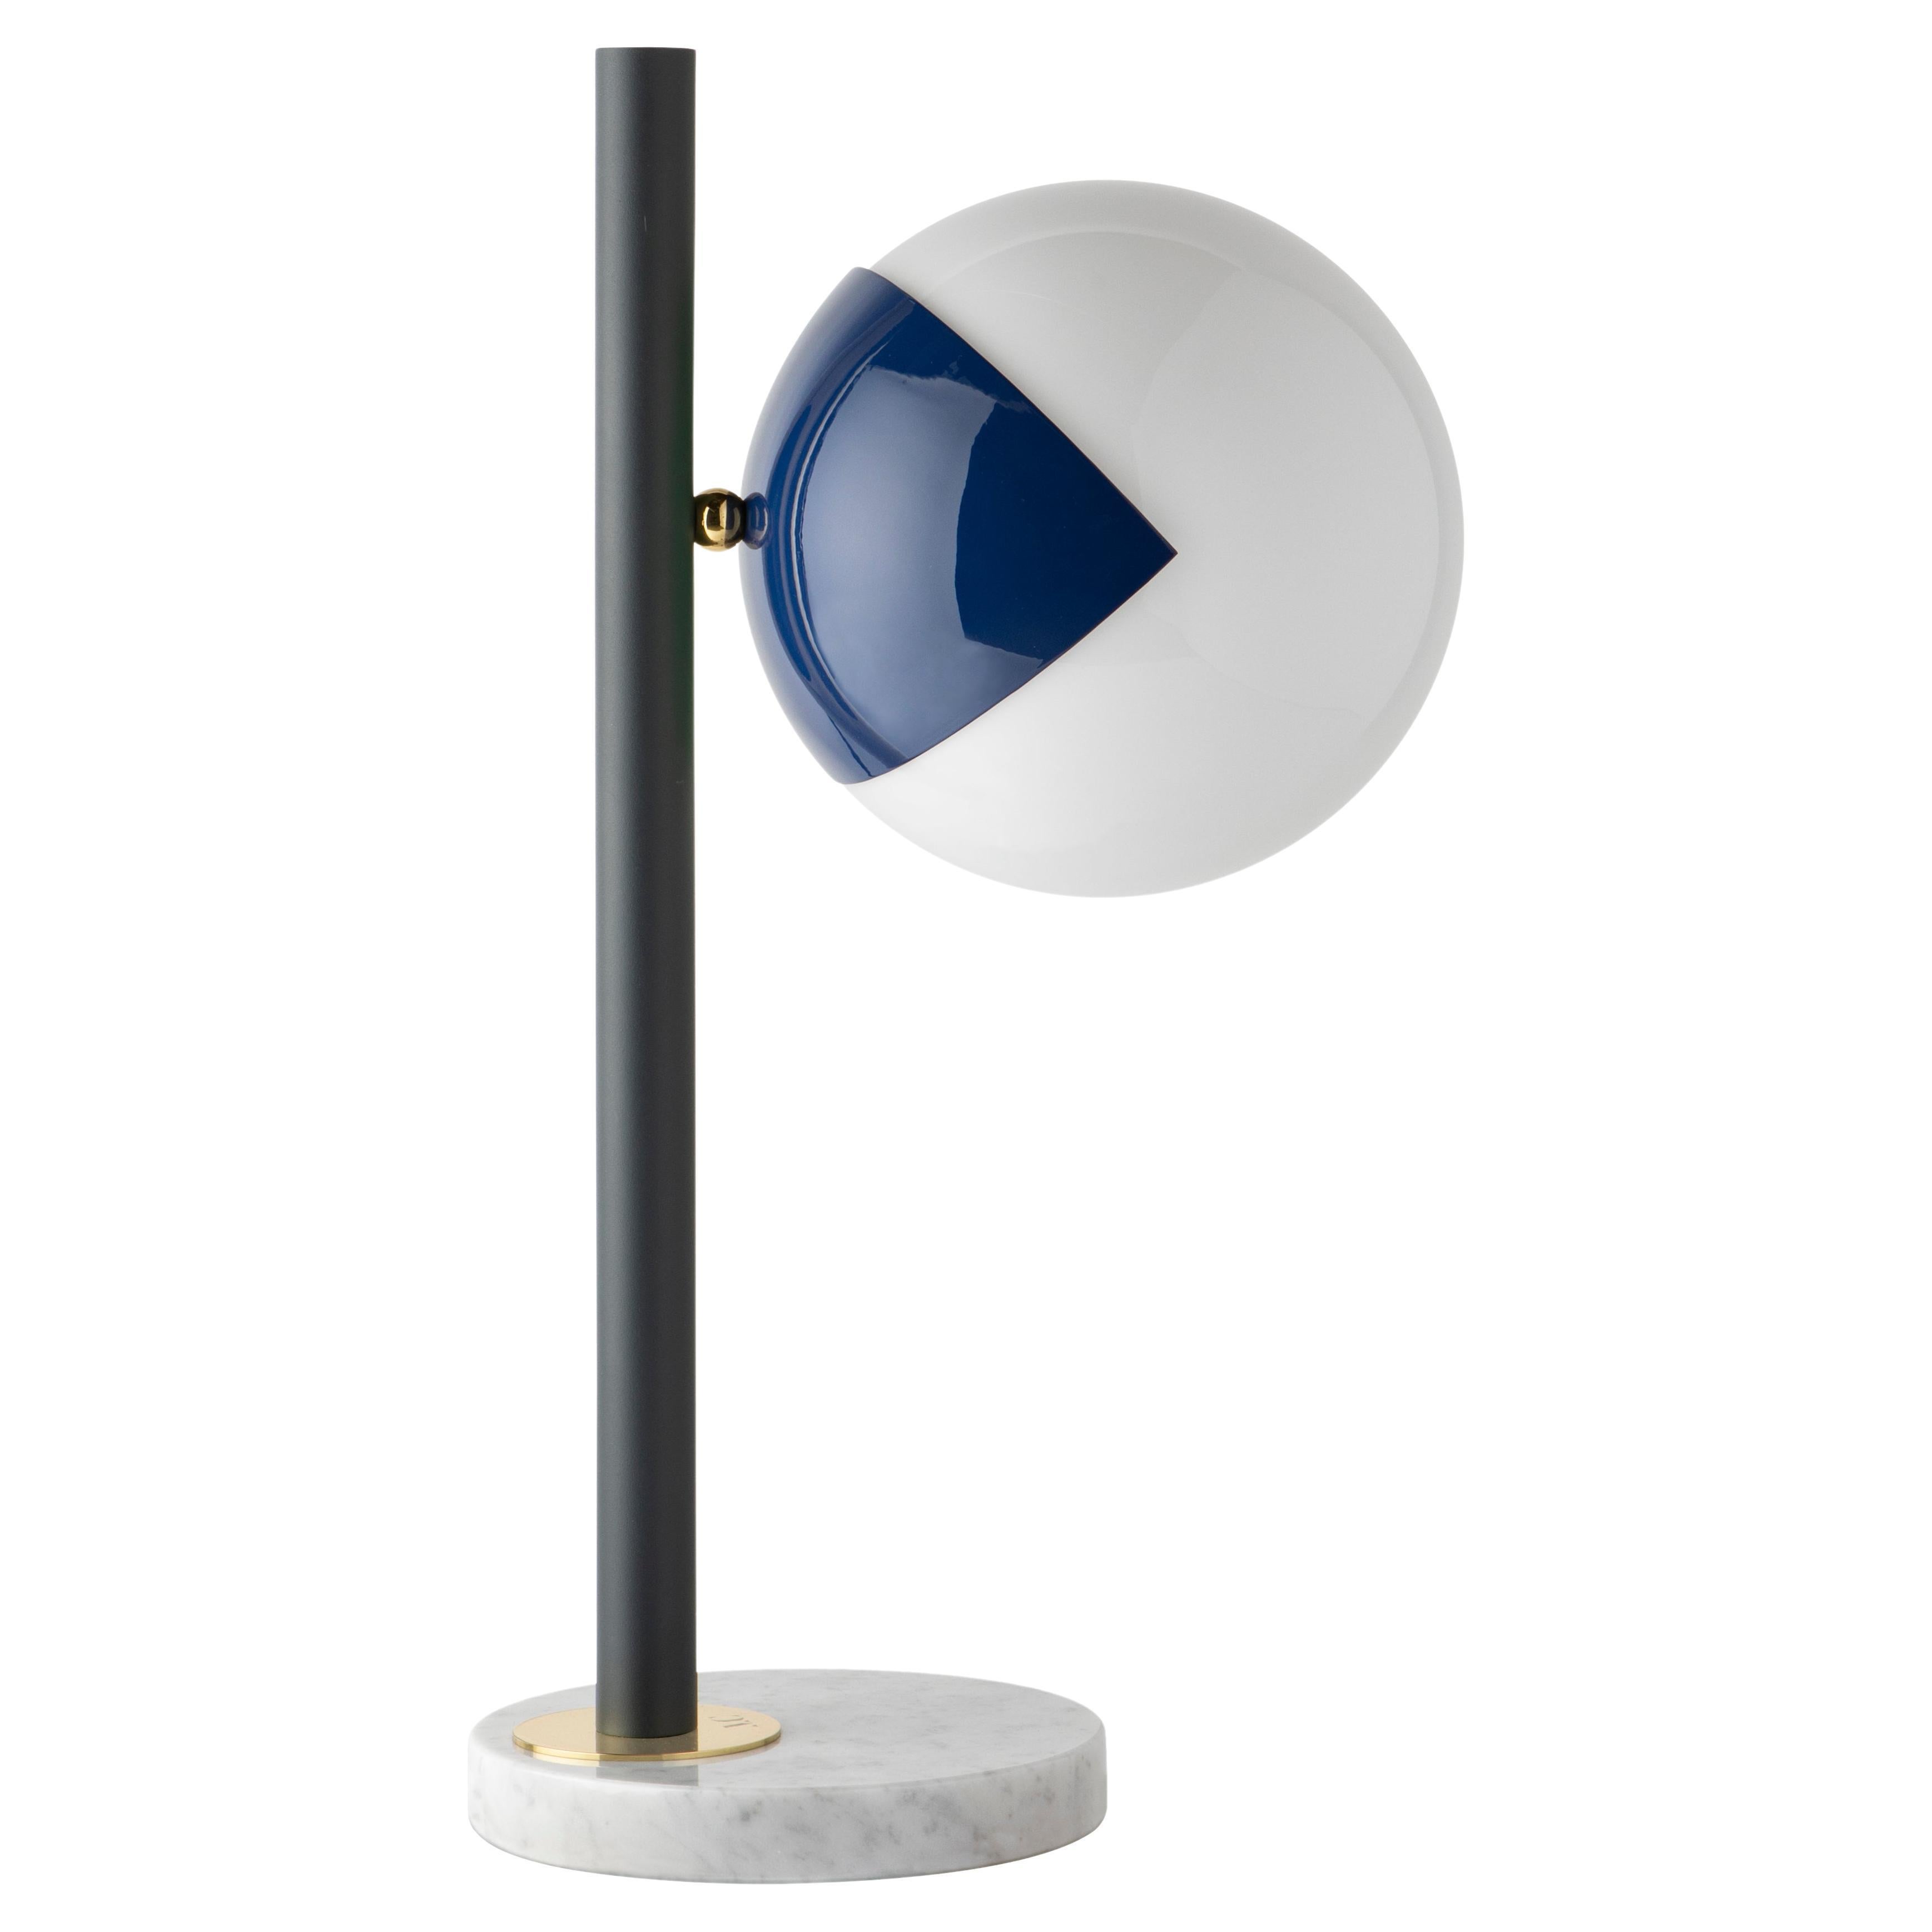 Set of 2 dimmable table lamp pop-up black by Magic Circus Editions
Dimensions: Ø 22 x 30 x 53 cm 
Materials: Carrara marble base, smooth brass tube, glossy mouth blown glass

All our lamps can be wired according to each country. If sold to the